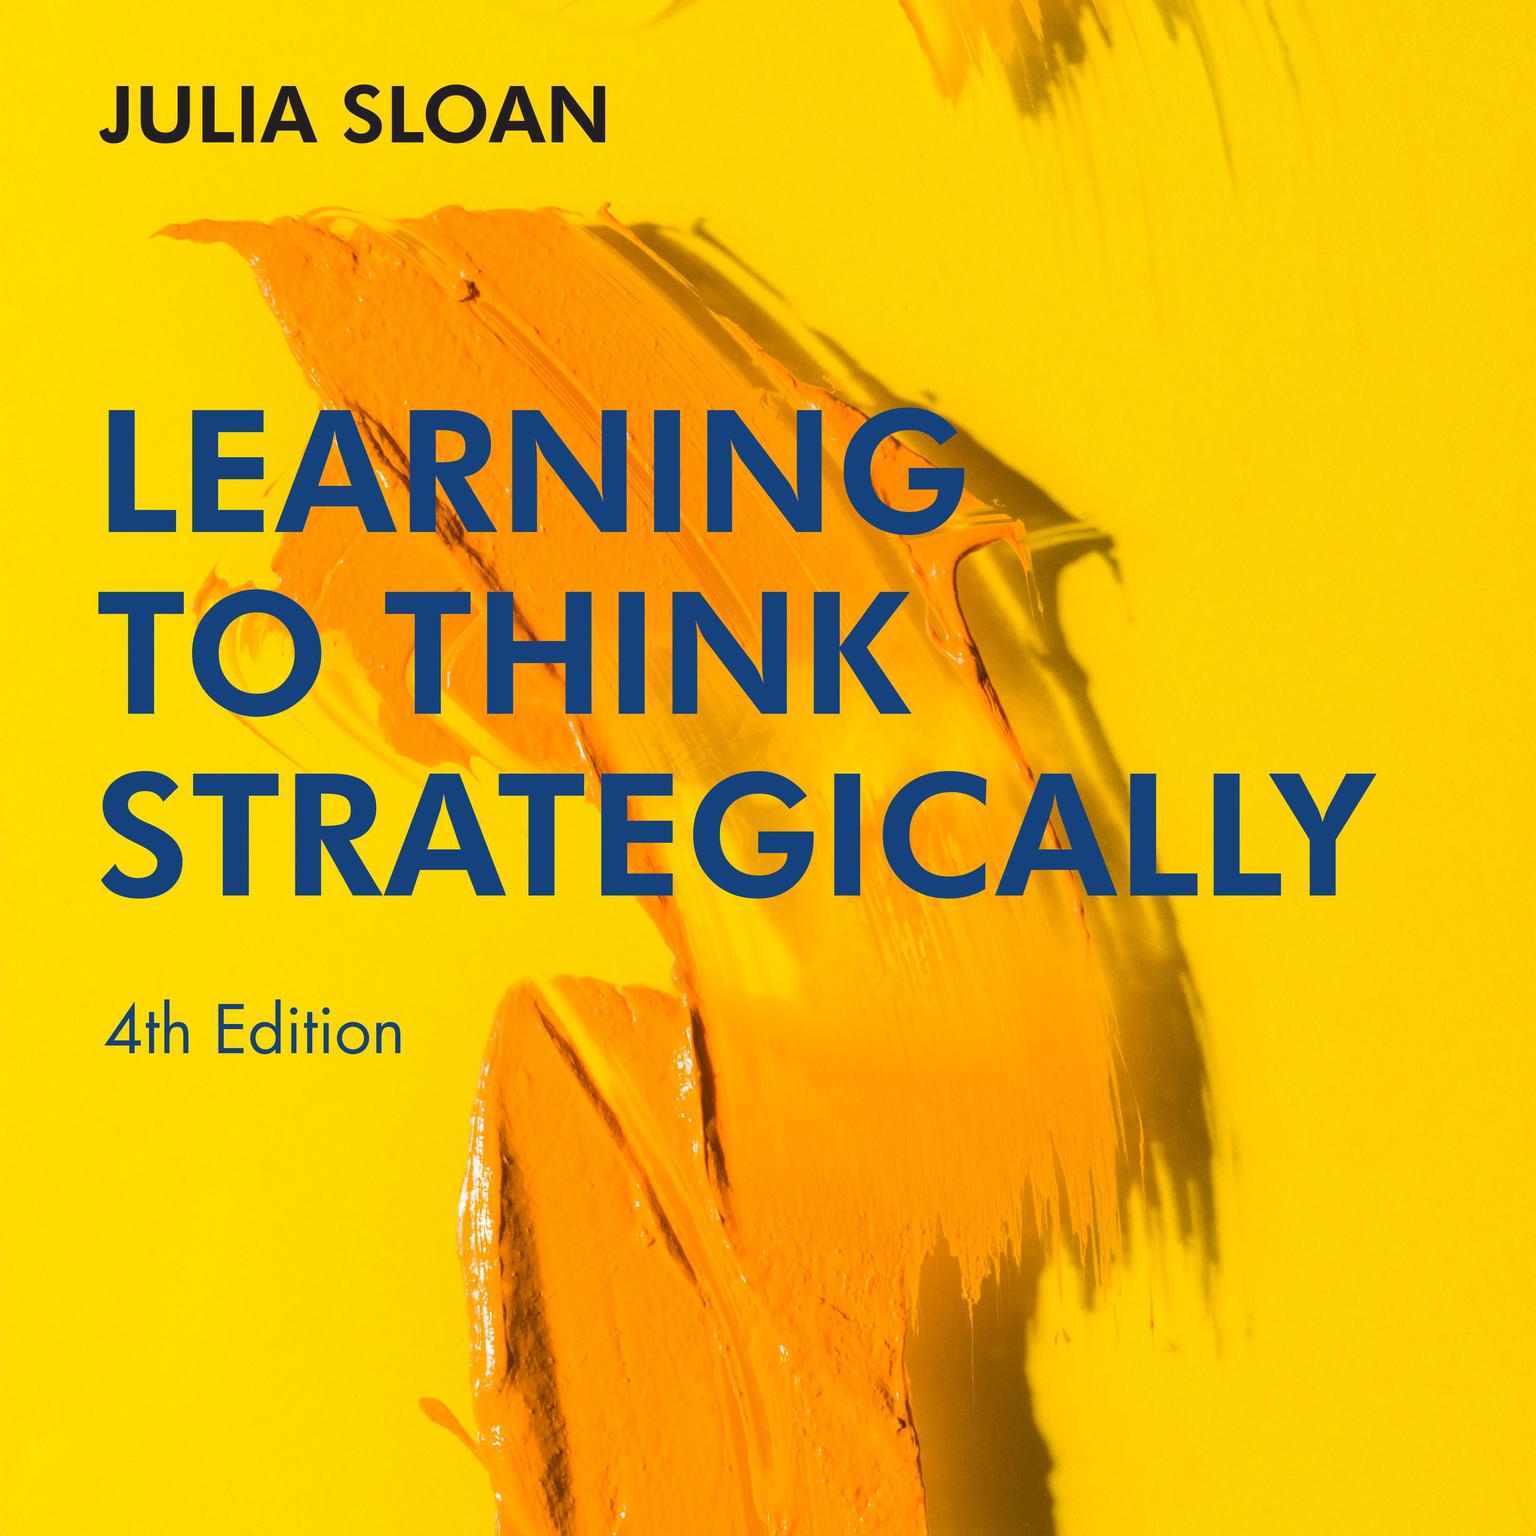 Learning to Think Strategically: 4th Edition Audiobook, by Julia Sloan